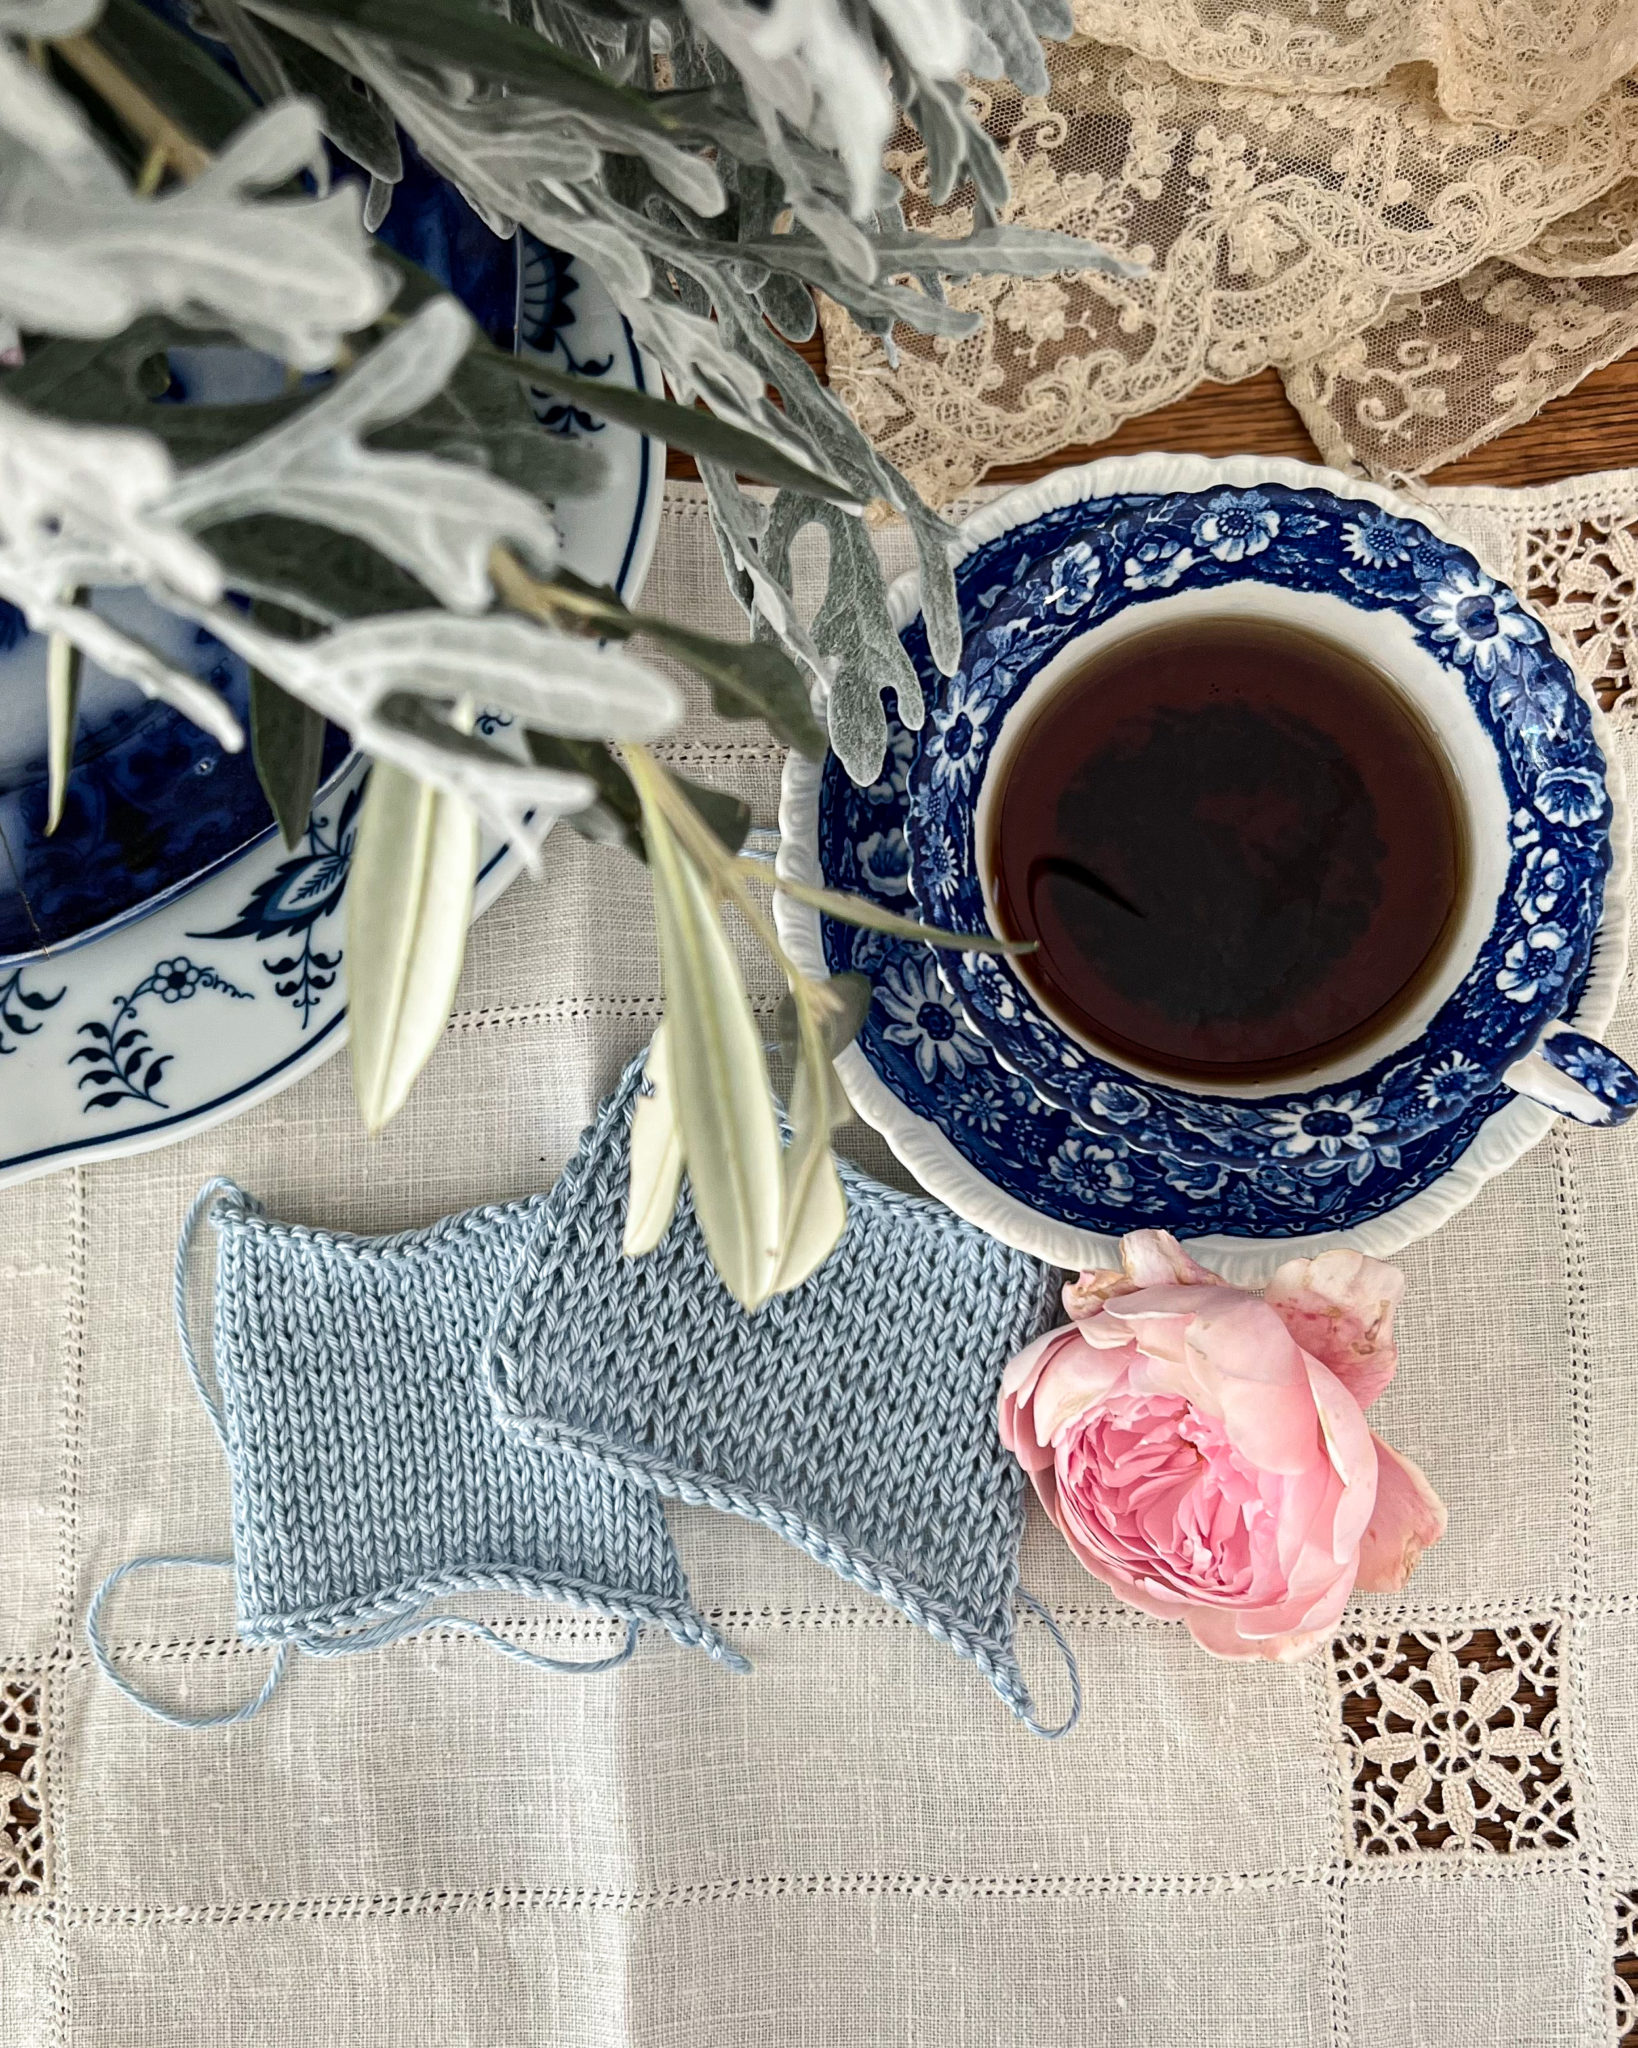 Two blue rectangle swatches are viewed top down through blurred plant leaves in the foreground. One swatch has even stitches, while one has visible rowing out. They are on a white linen placemat next to a blue and white teacup.